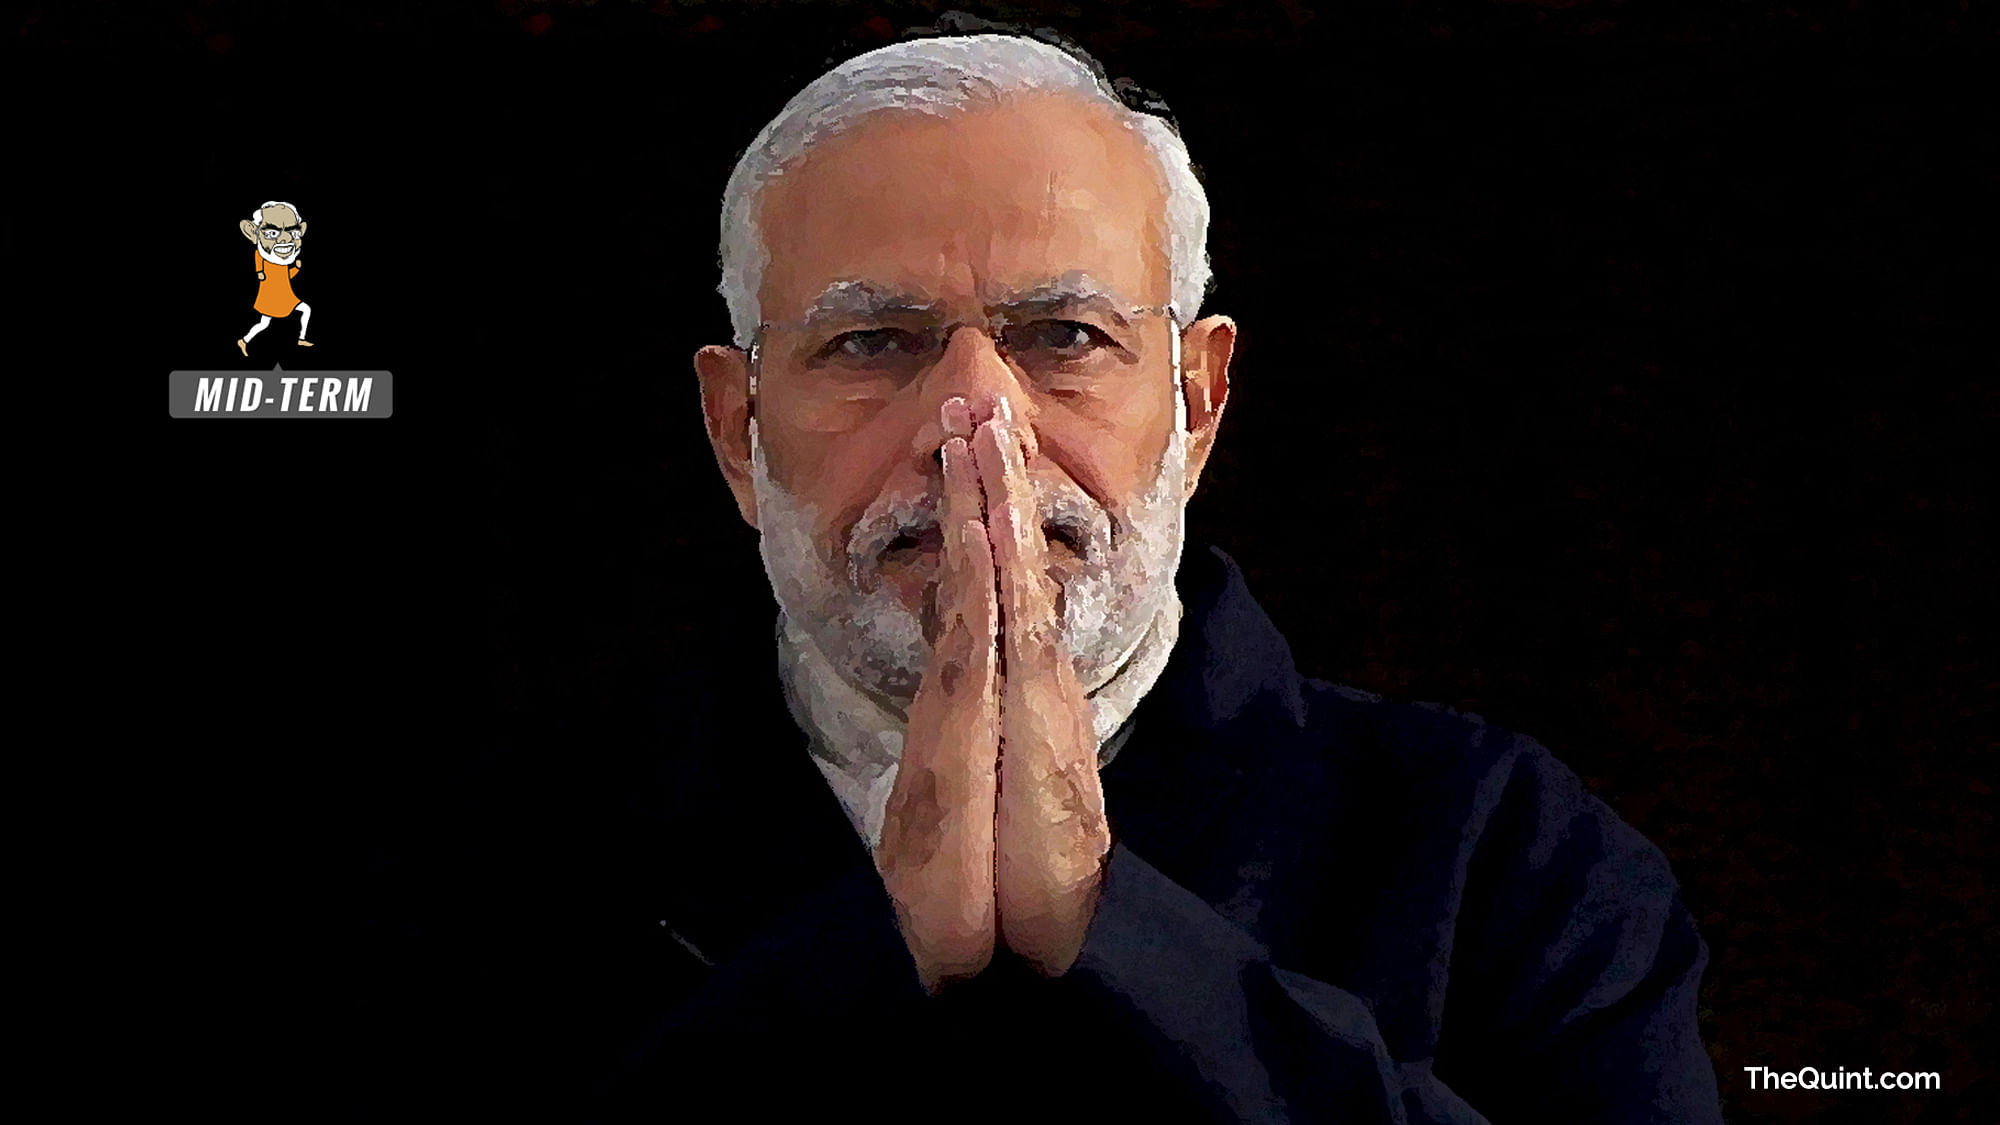 It’s time to take stock of the hits and misses of the Modi-led government as it reaches midterm in office. (Photo: Reuters/Altered by <b>The Quint</b>)